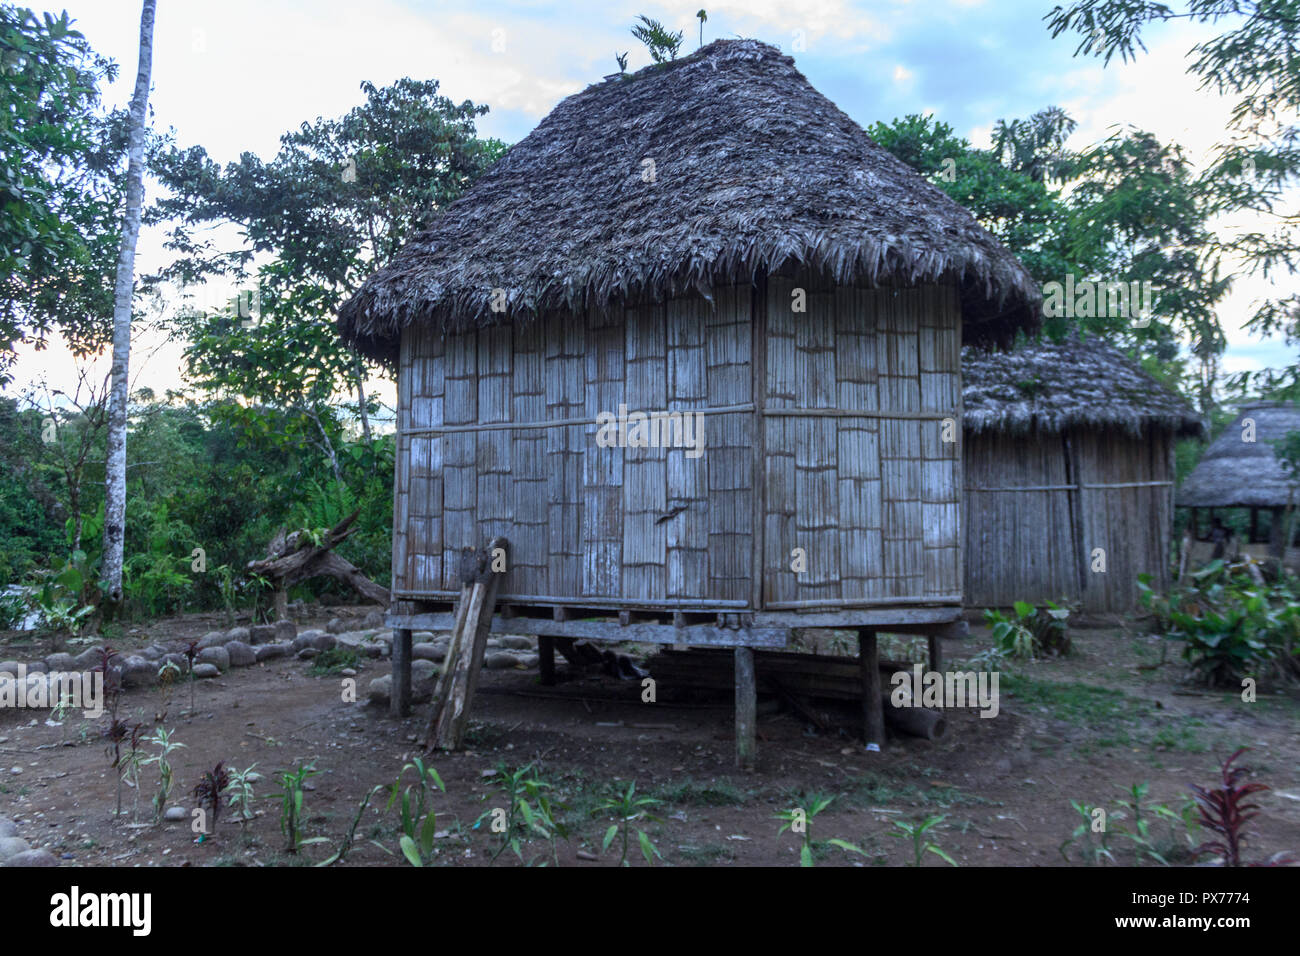 Amazon Rainforest Brazil Hut High Resolution Stock Photography and Images -  Alamy